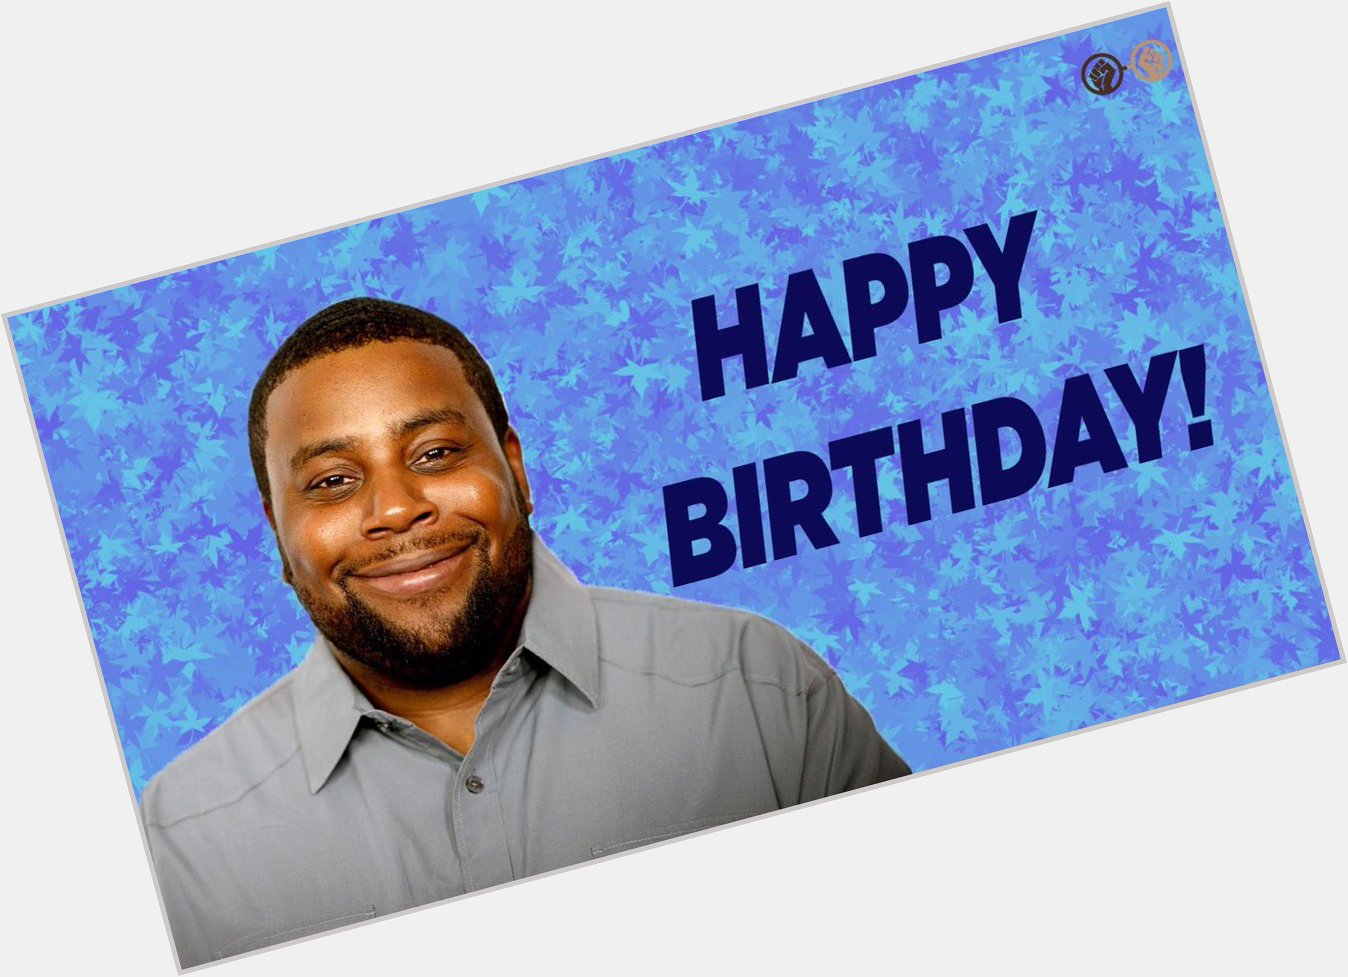 Wishing the hilarious Kenan Thompson a very happy birthday! The SNL legend turns 40 today! 